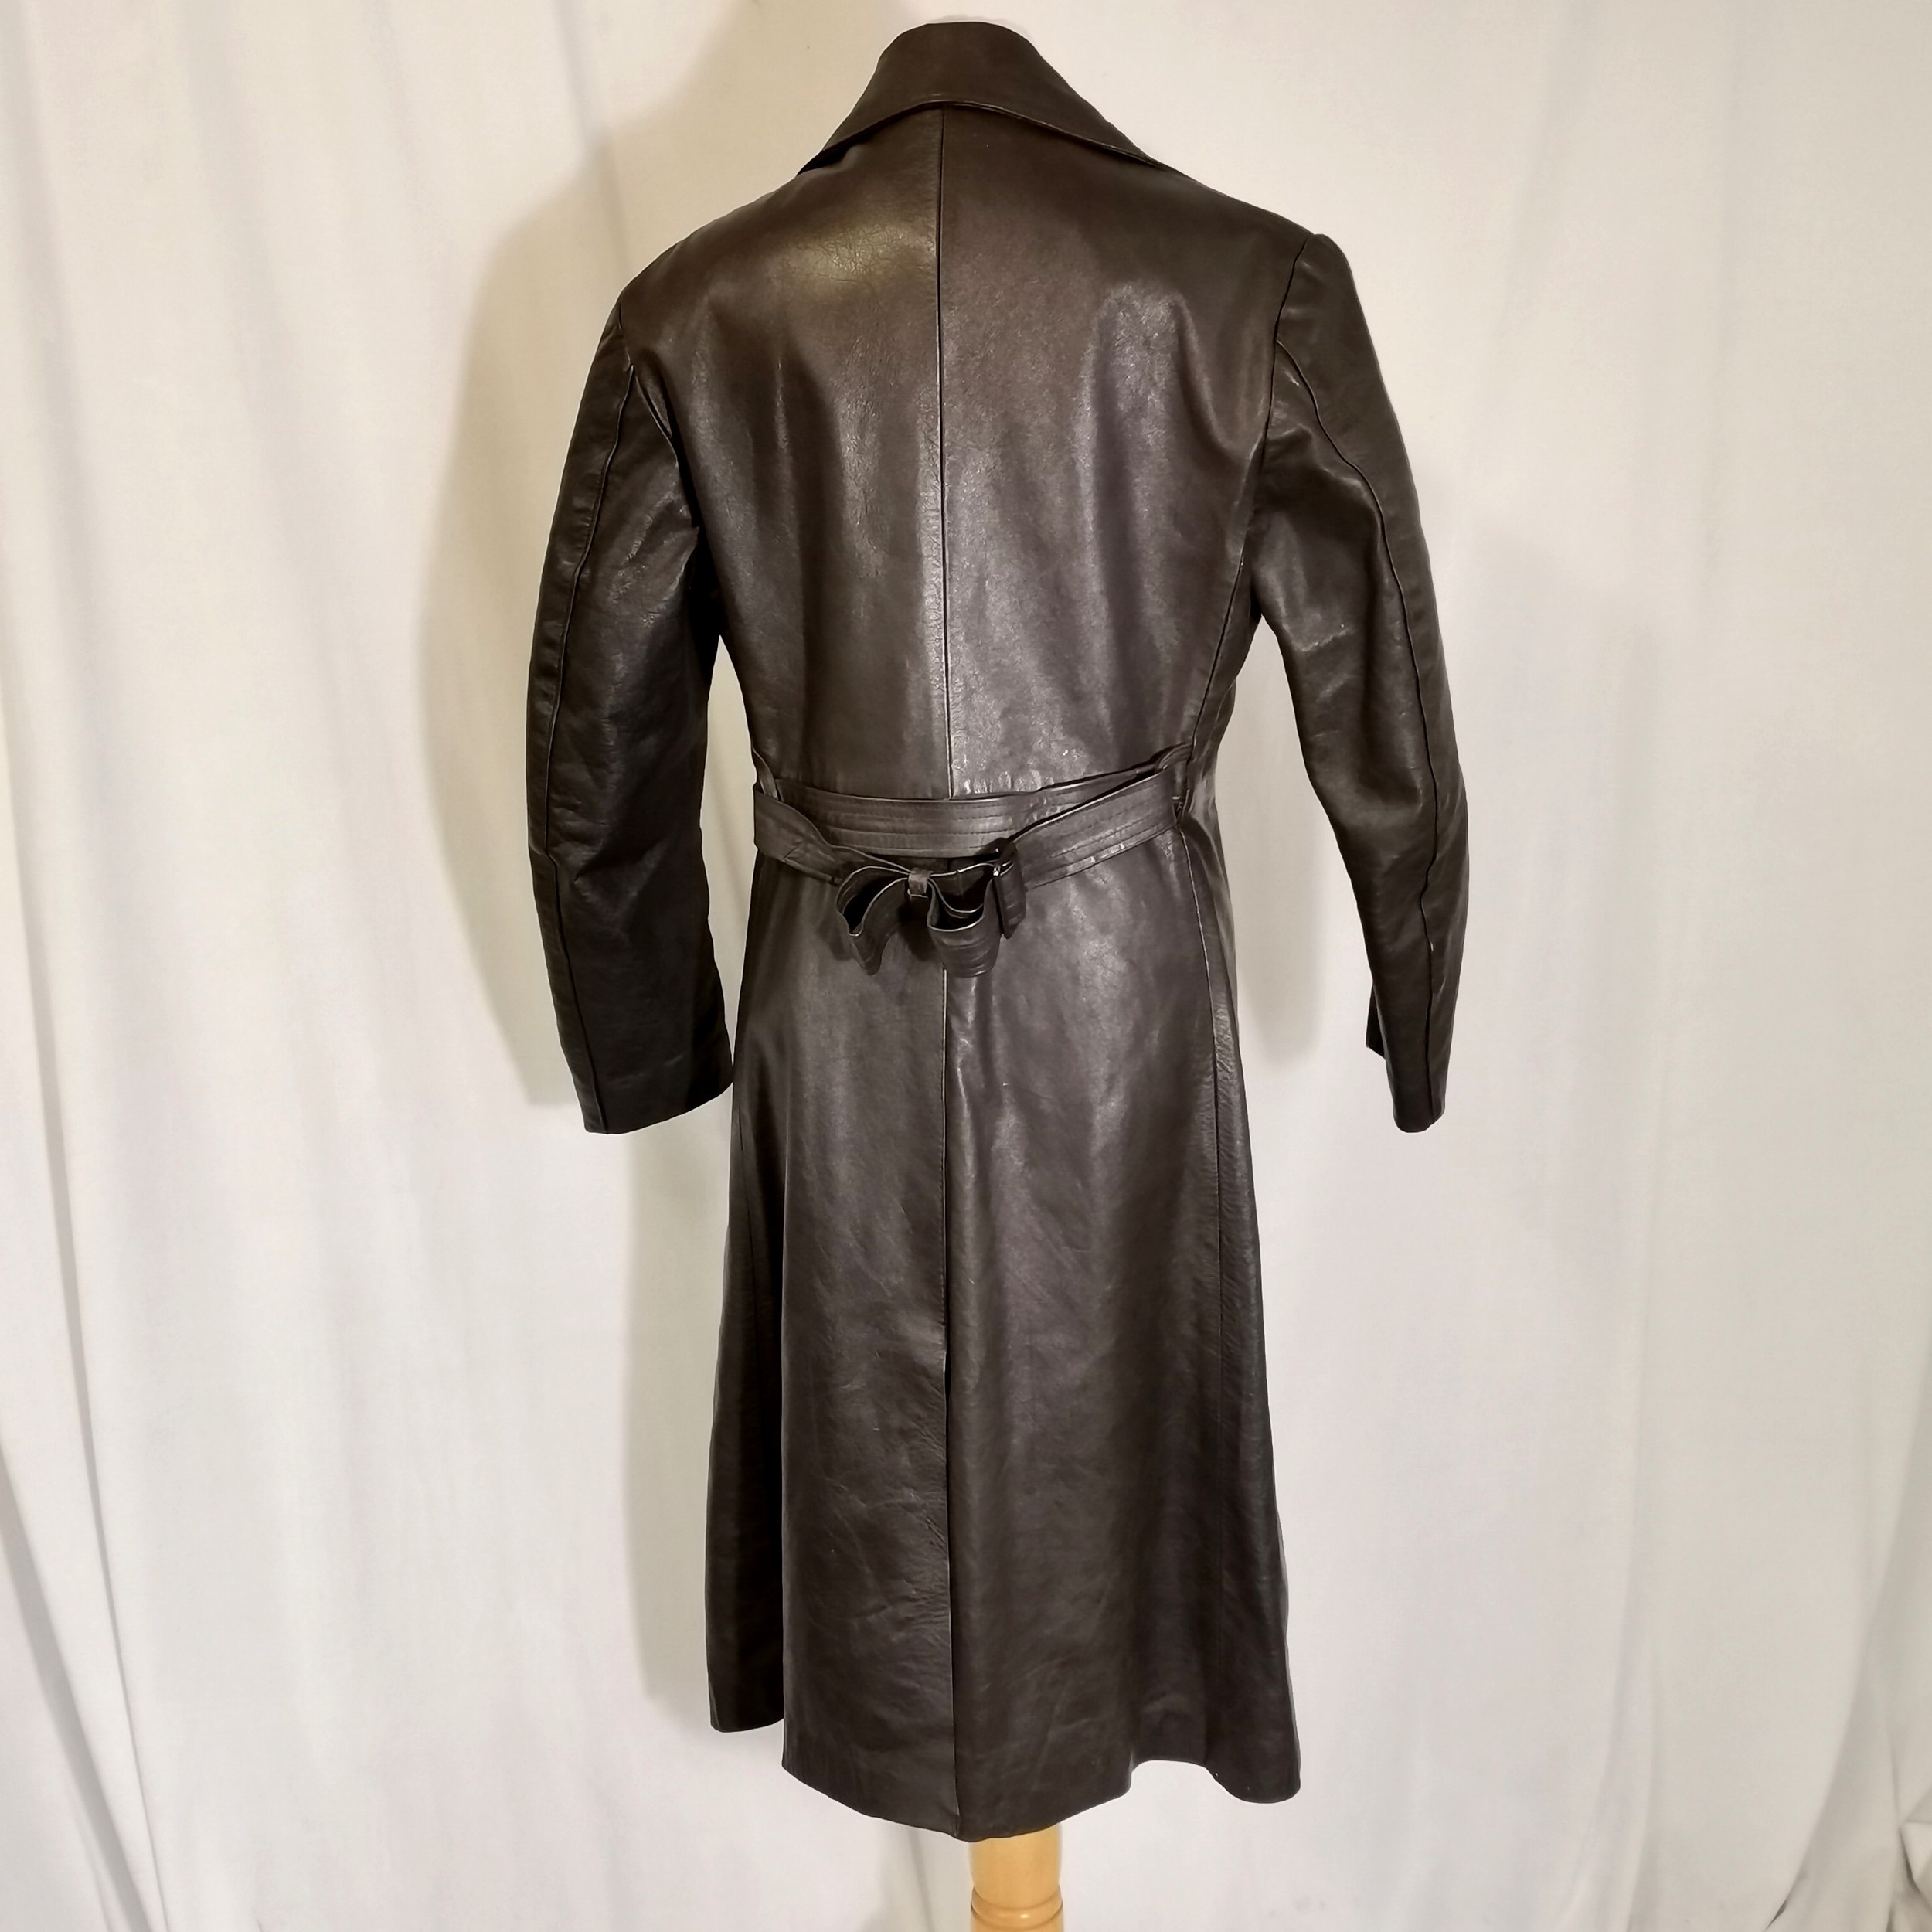 Vintage leather coat with leather strap tie back - 110cm chest - good used condition - Image 2 of 3